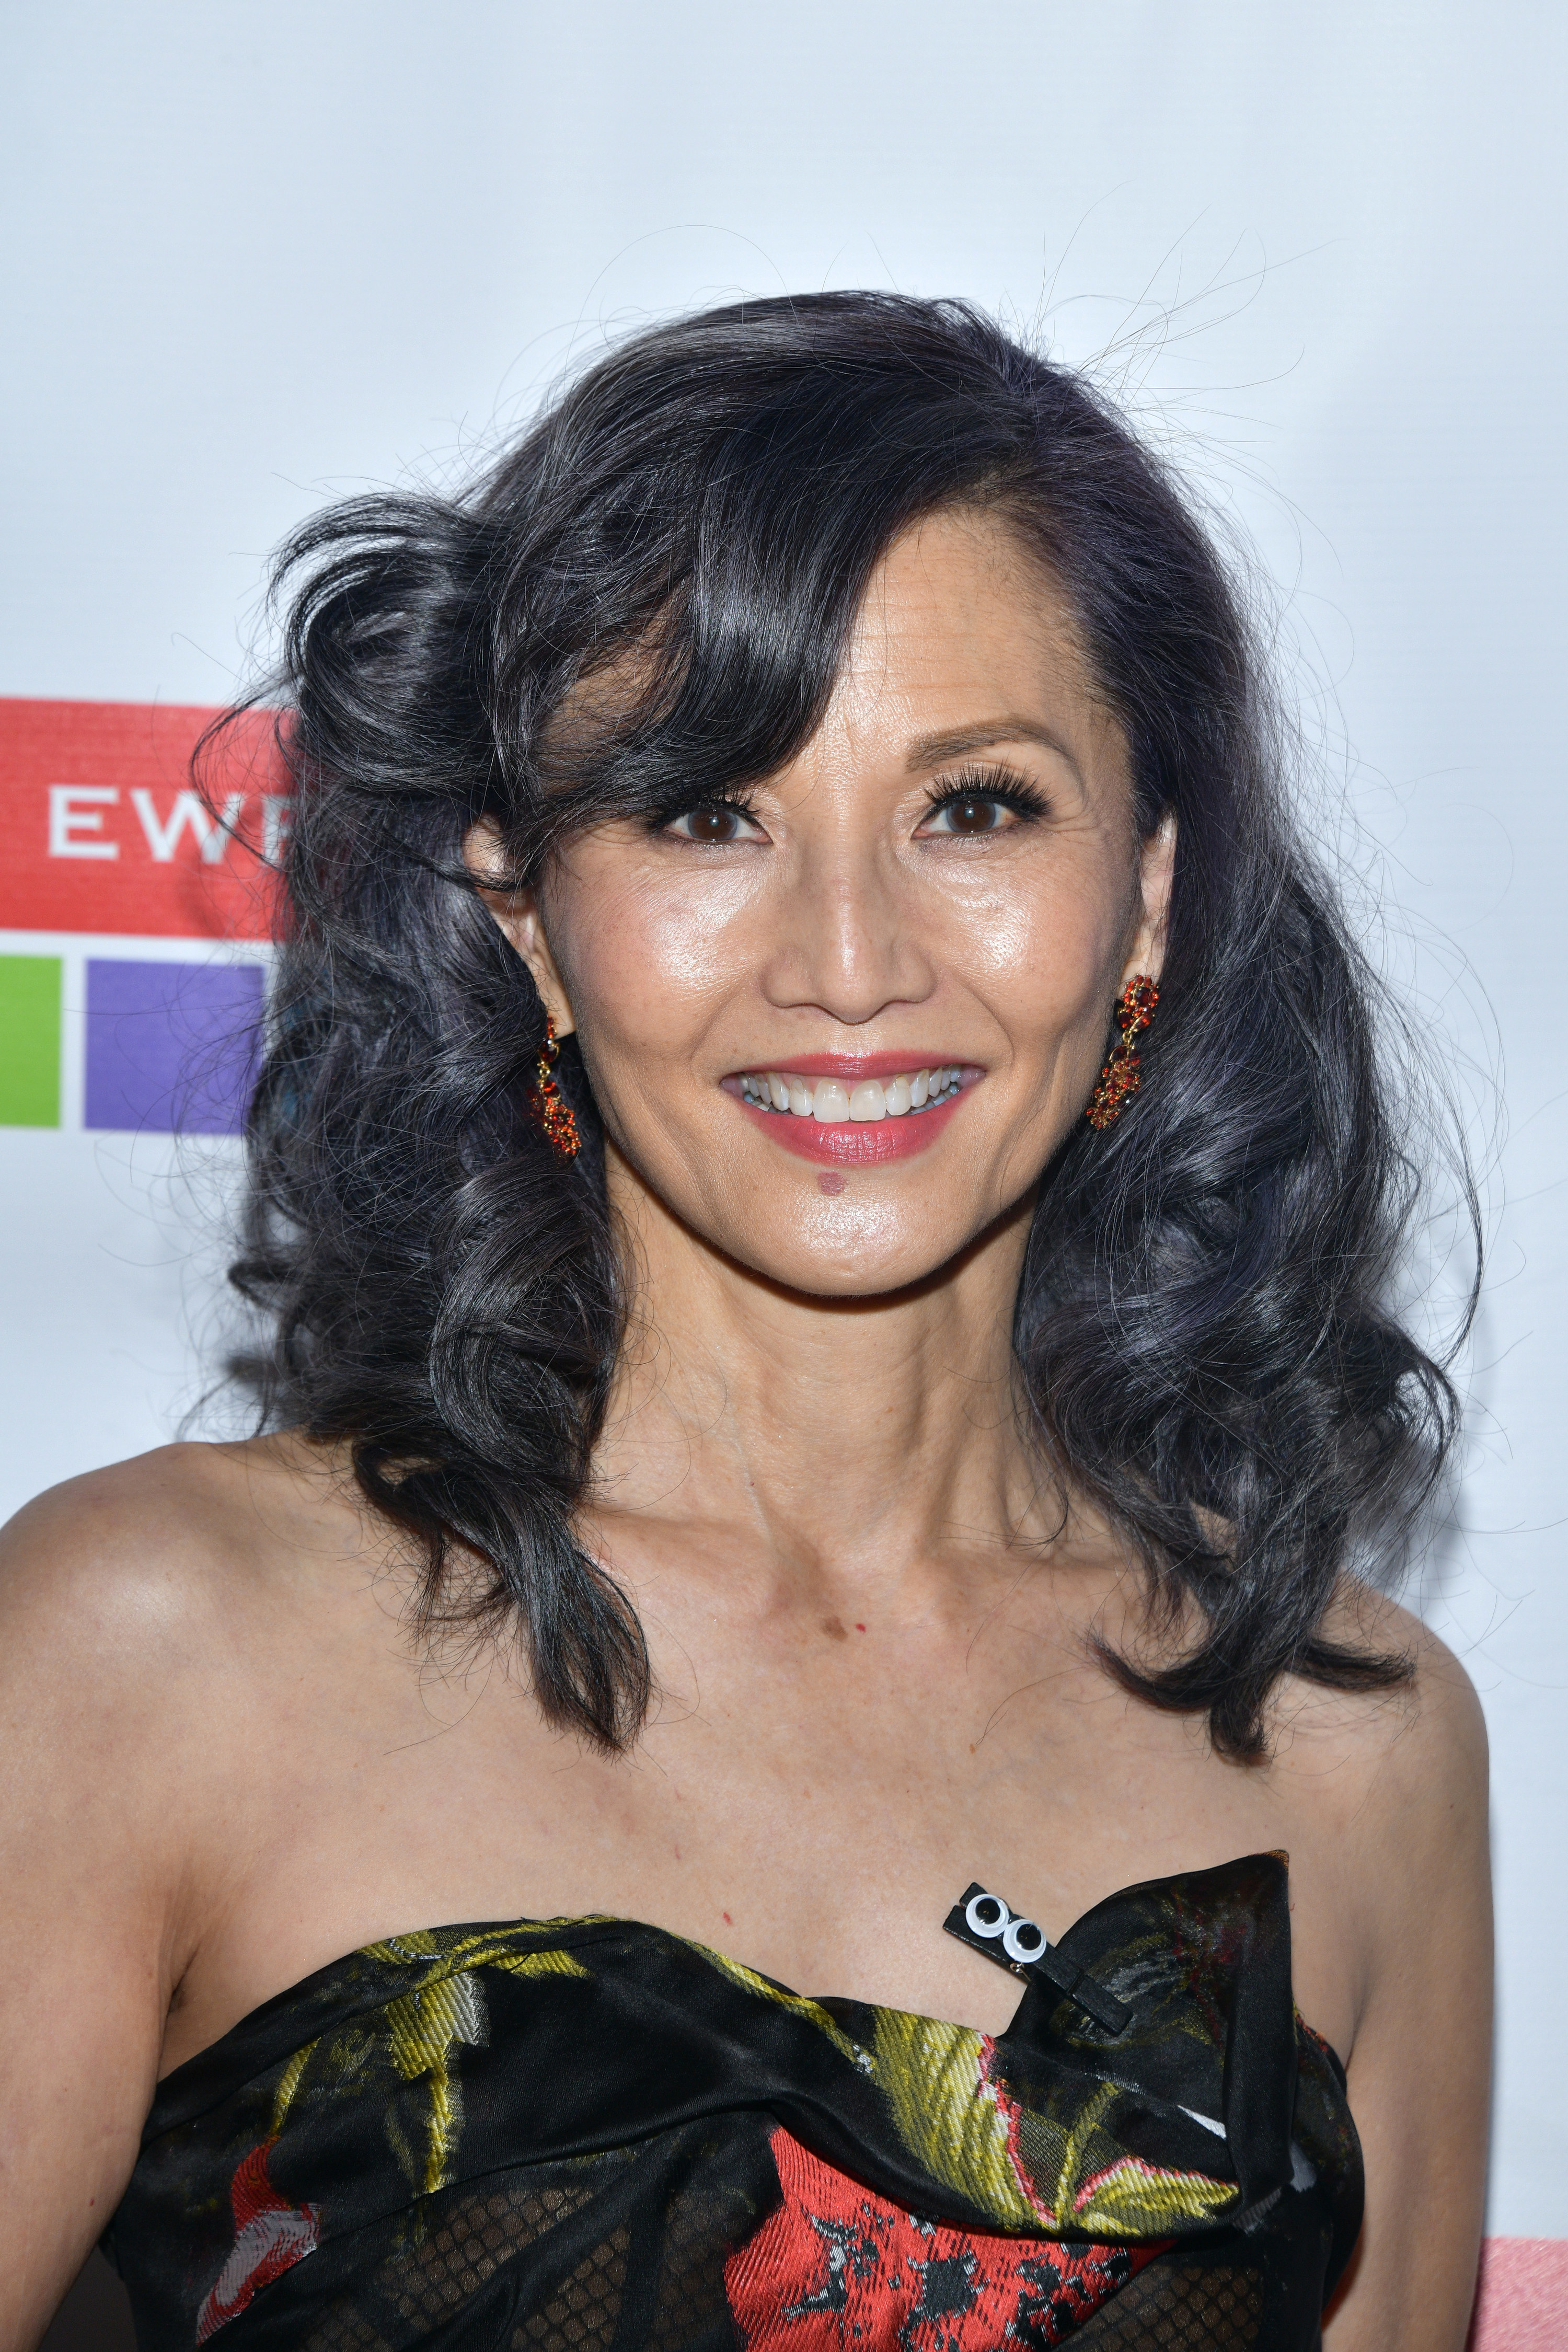 Tamlyn Tomita attends the East West Players 56th Anniversary Visionary Awards at City Market Social House on April 23, 2022 in Los Angeles, California